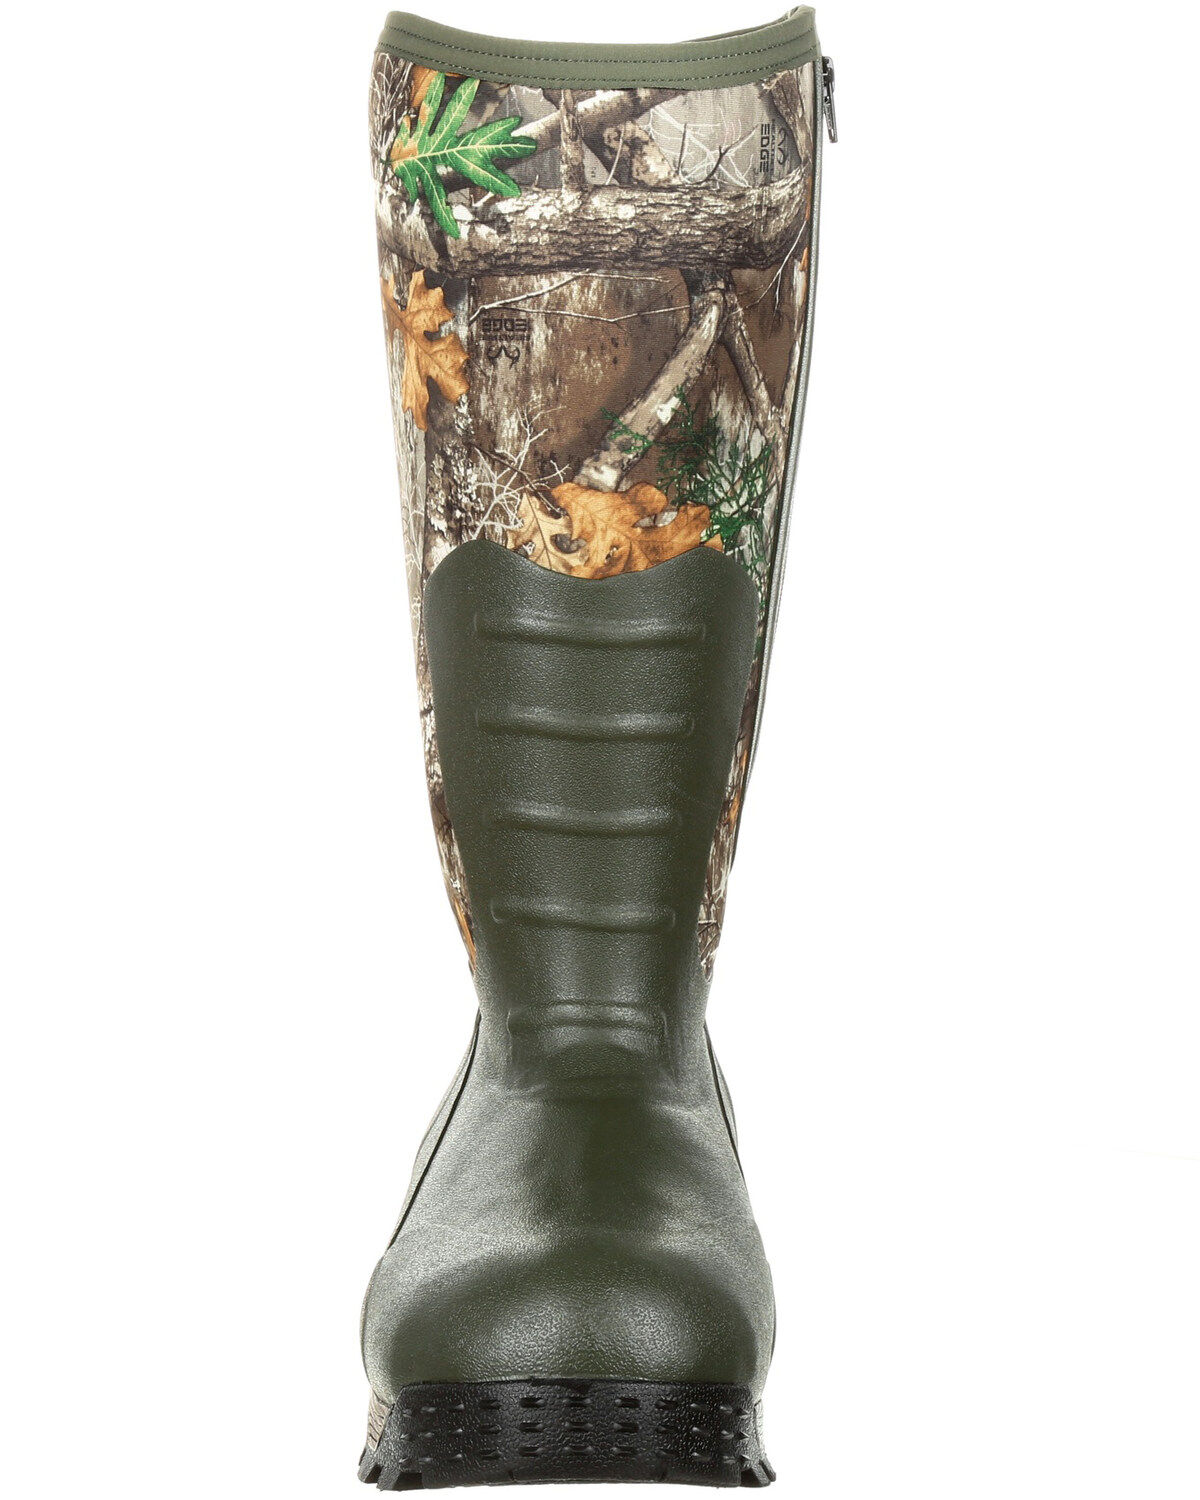 rocky rubber boots